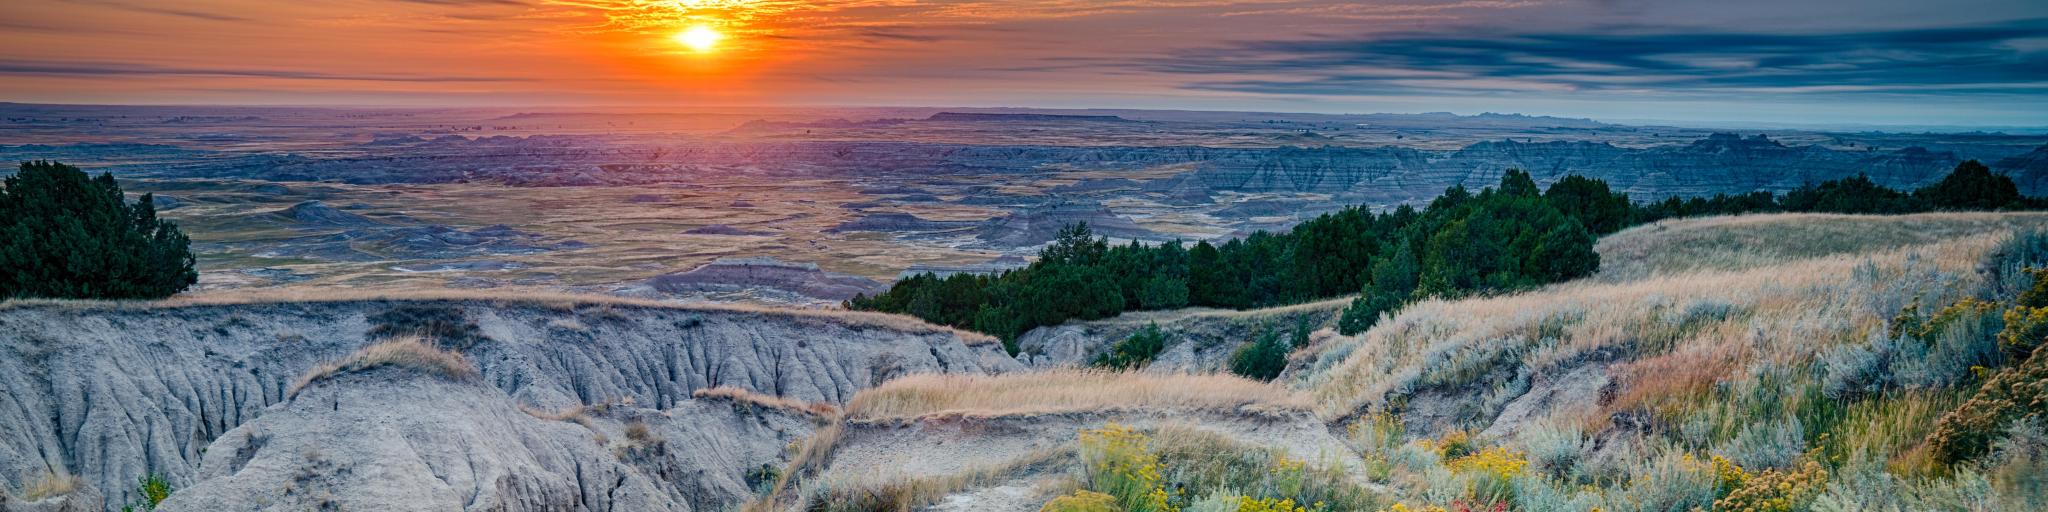 Badlands National Park, South Dakota at sunrise with pretty wildflowers growing in the foreground, rocky terrain and looking down at the valley in the distance.